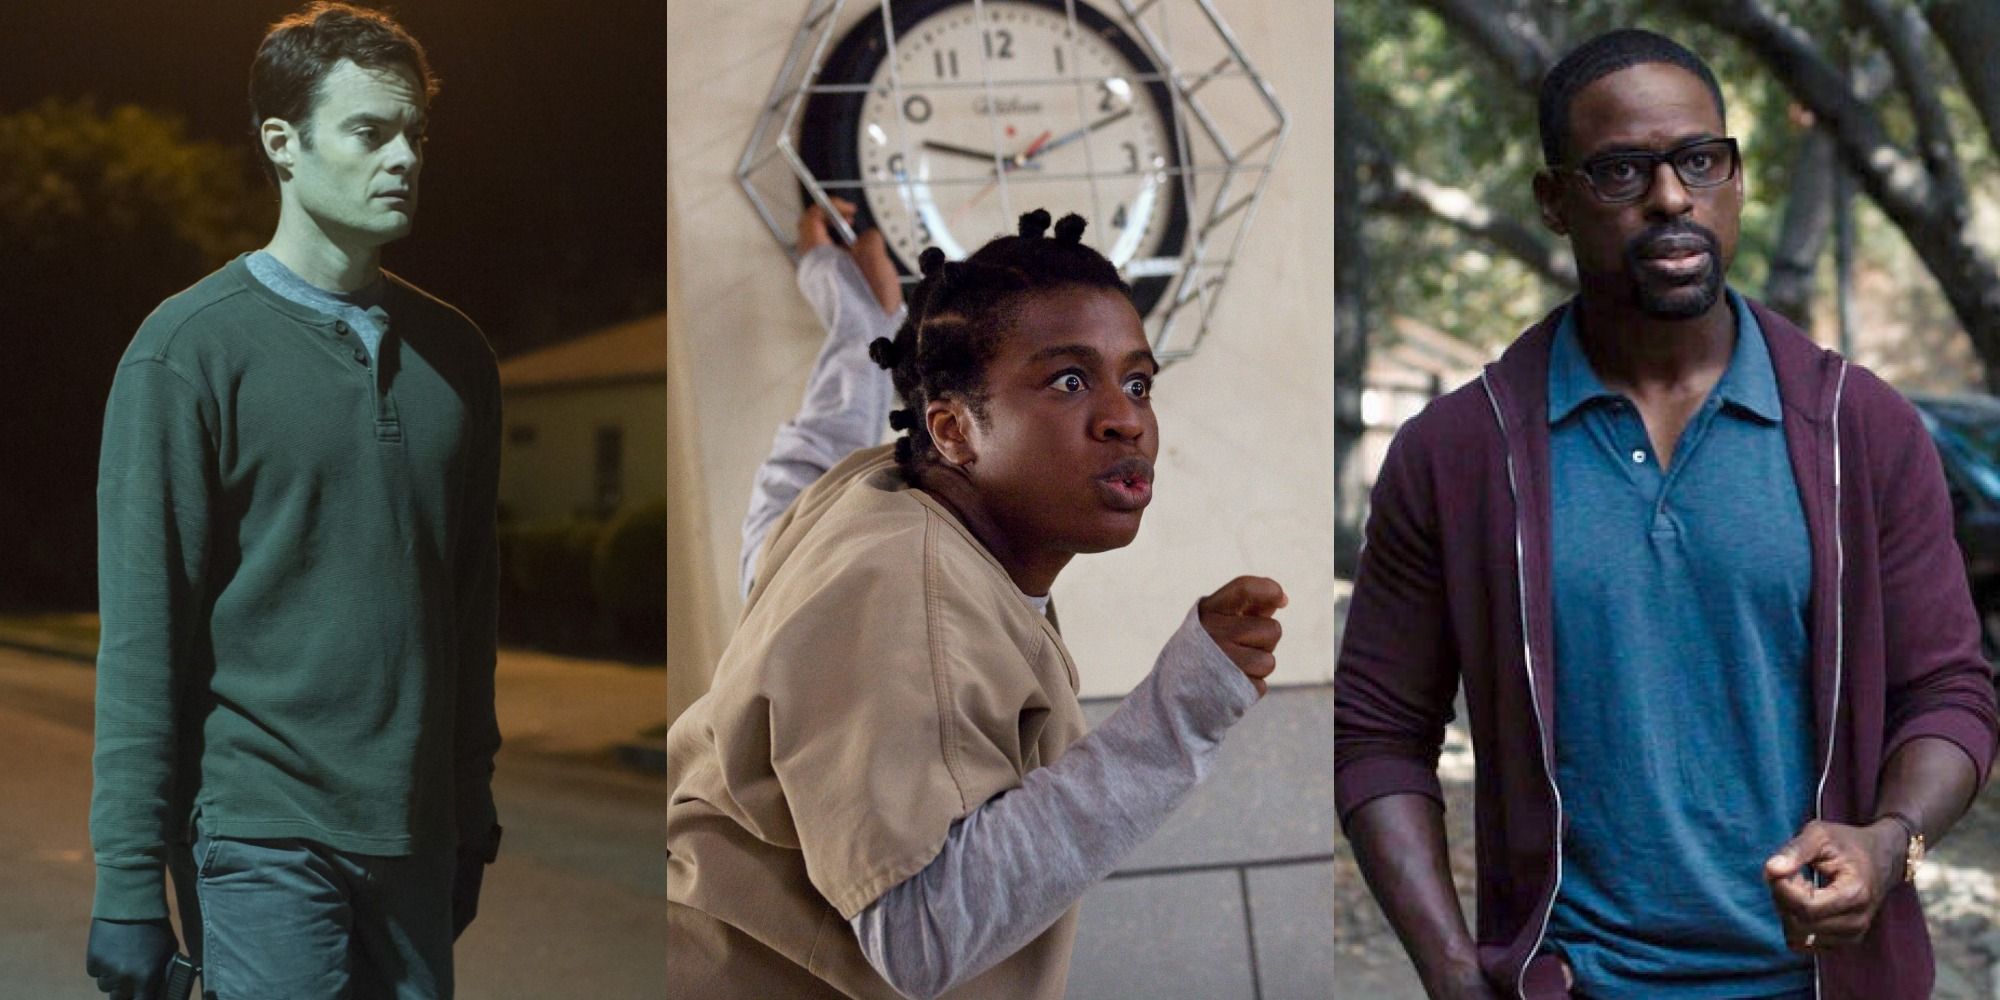 Split image of Barry walking, Suzanne by a clock in Orange is the New Black, and Randall Pearson in This is Us